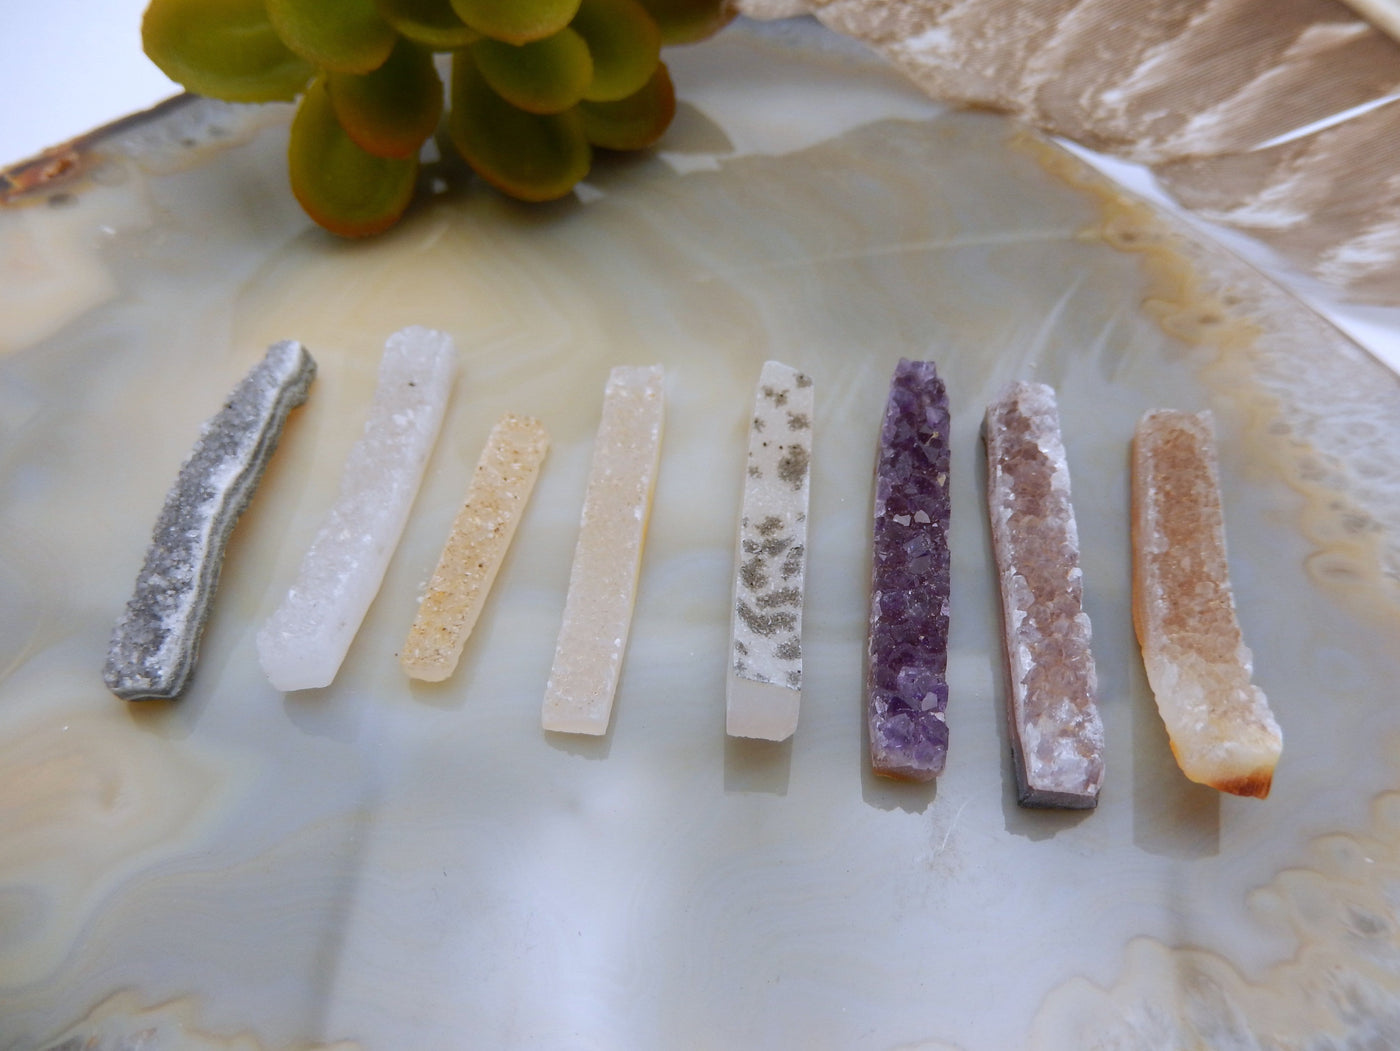 Druzy bar undrilled showing the different shades of the druzy